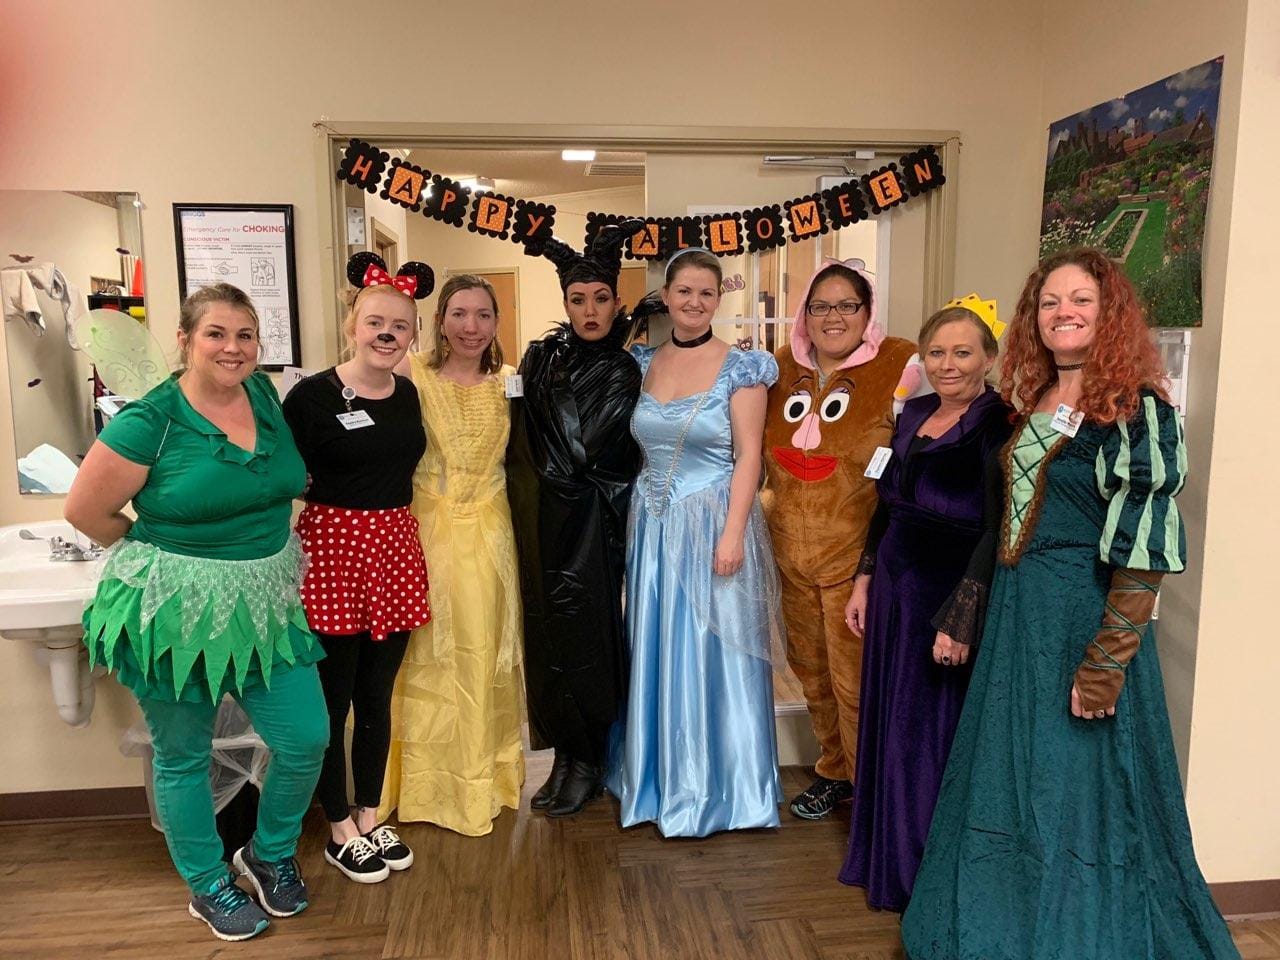 This is how we do Halloween in the Therapy world.